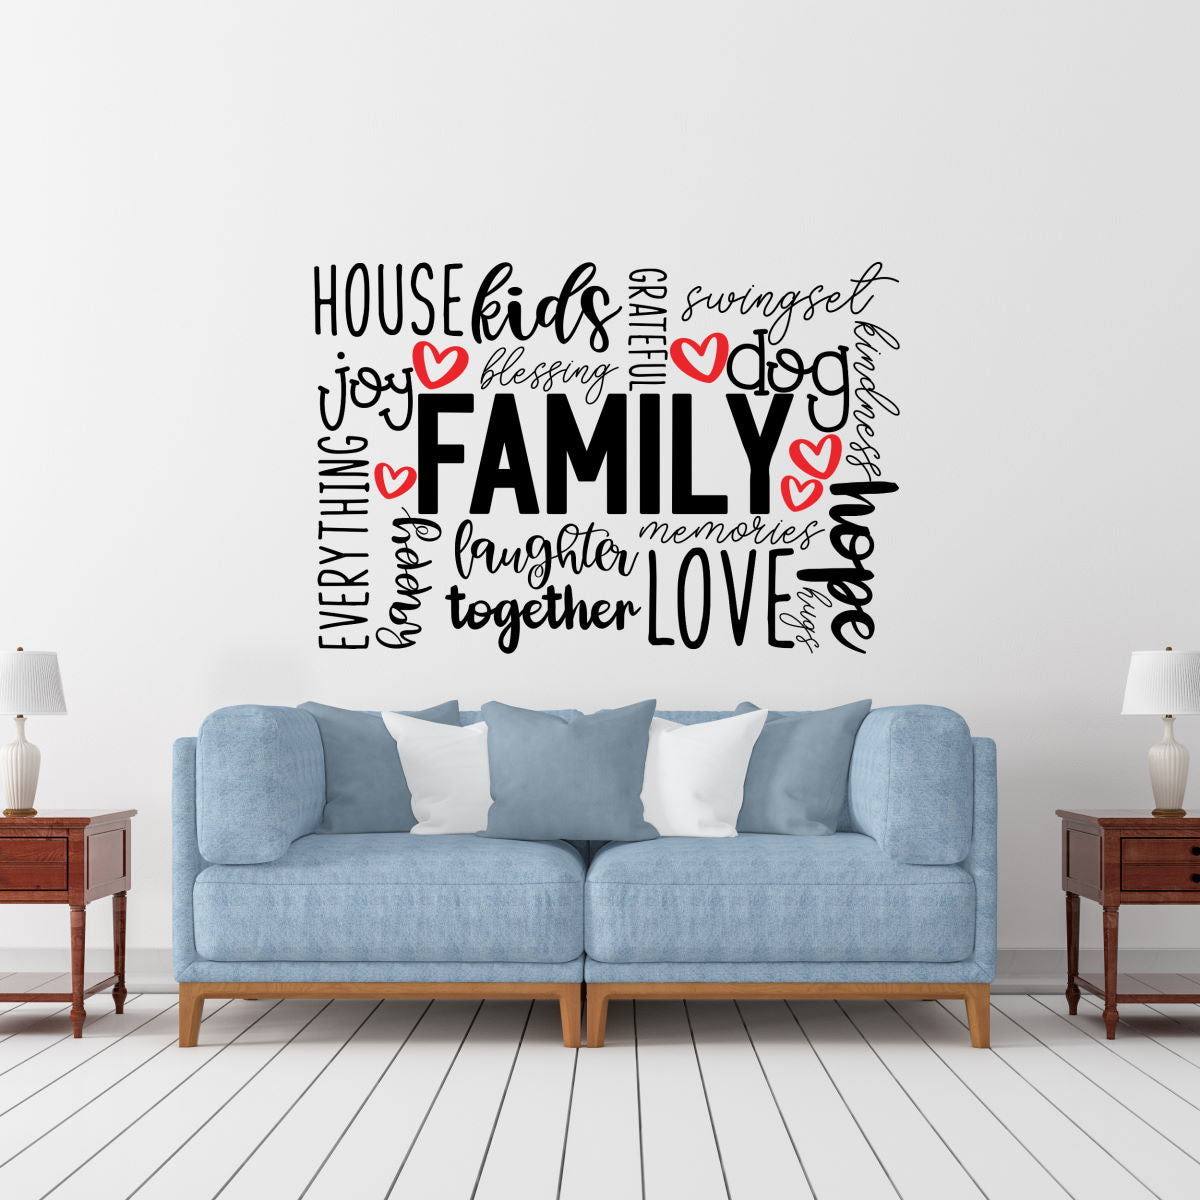 FAMILY word cloud wall decal